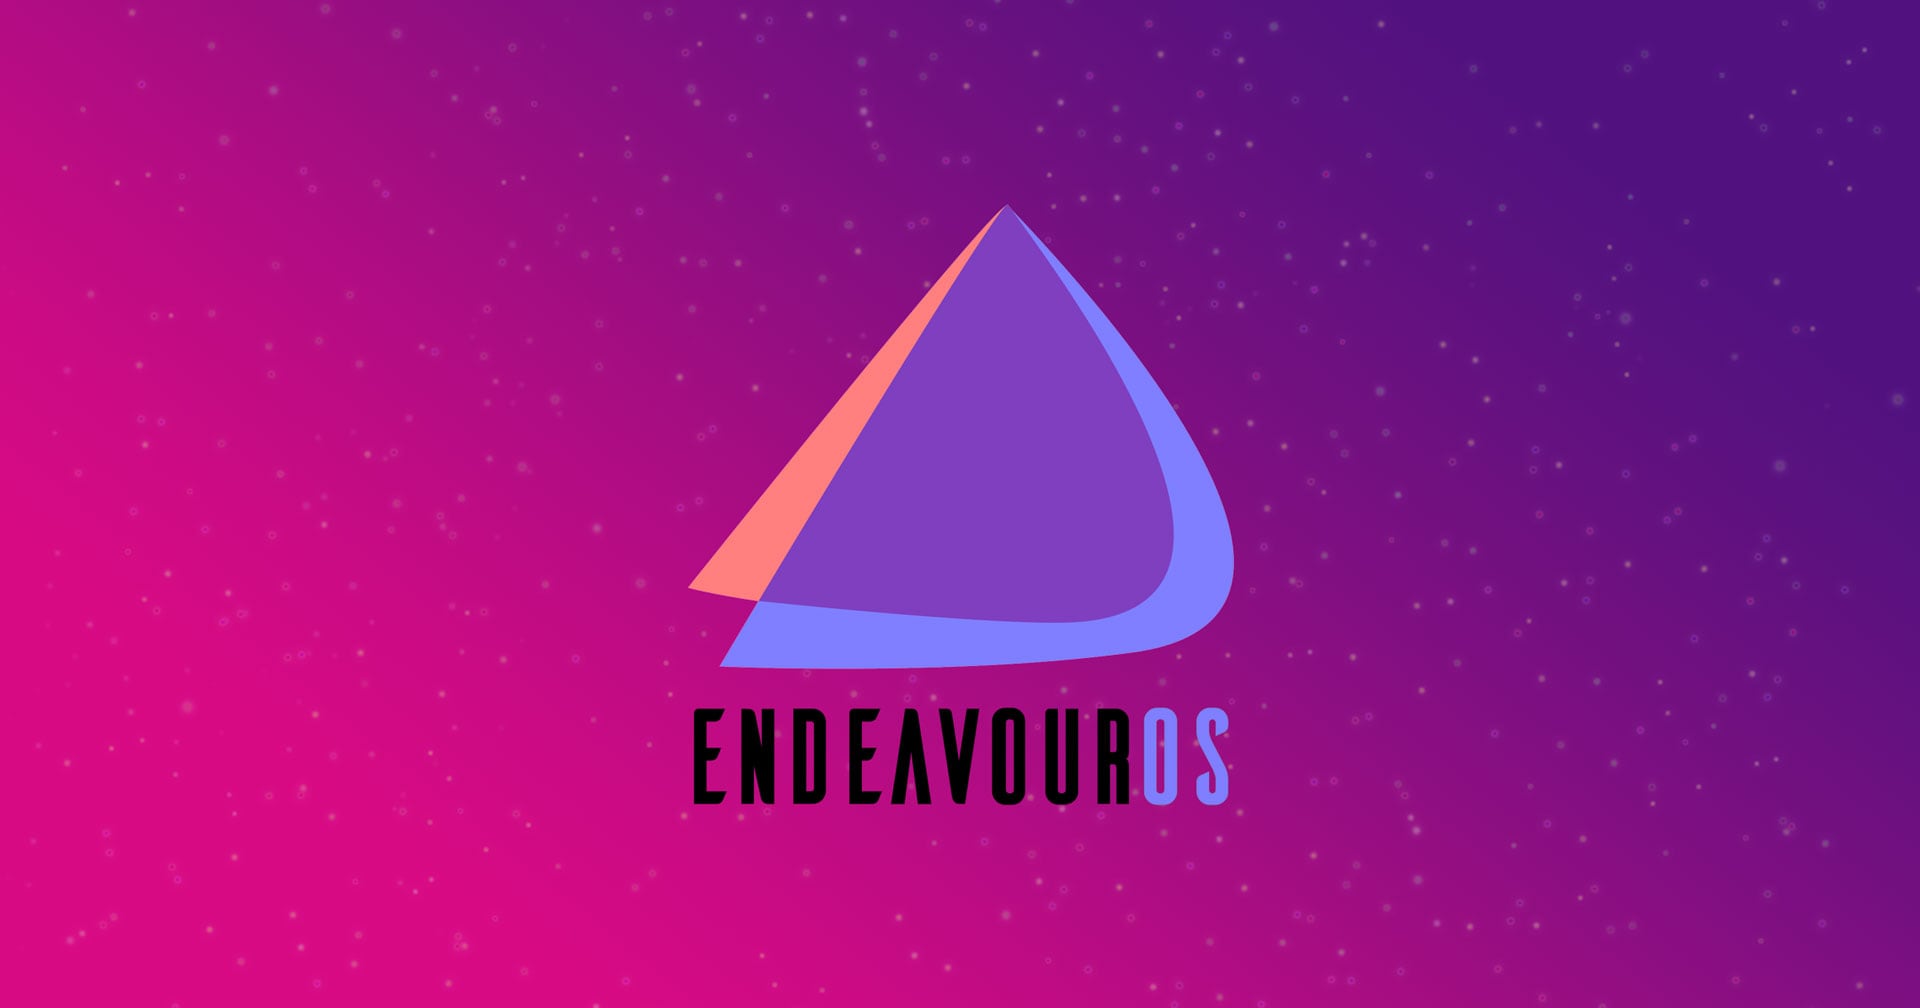 12-facts-about-endeavouros